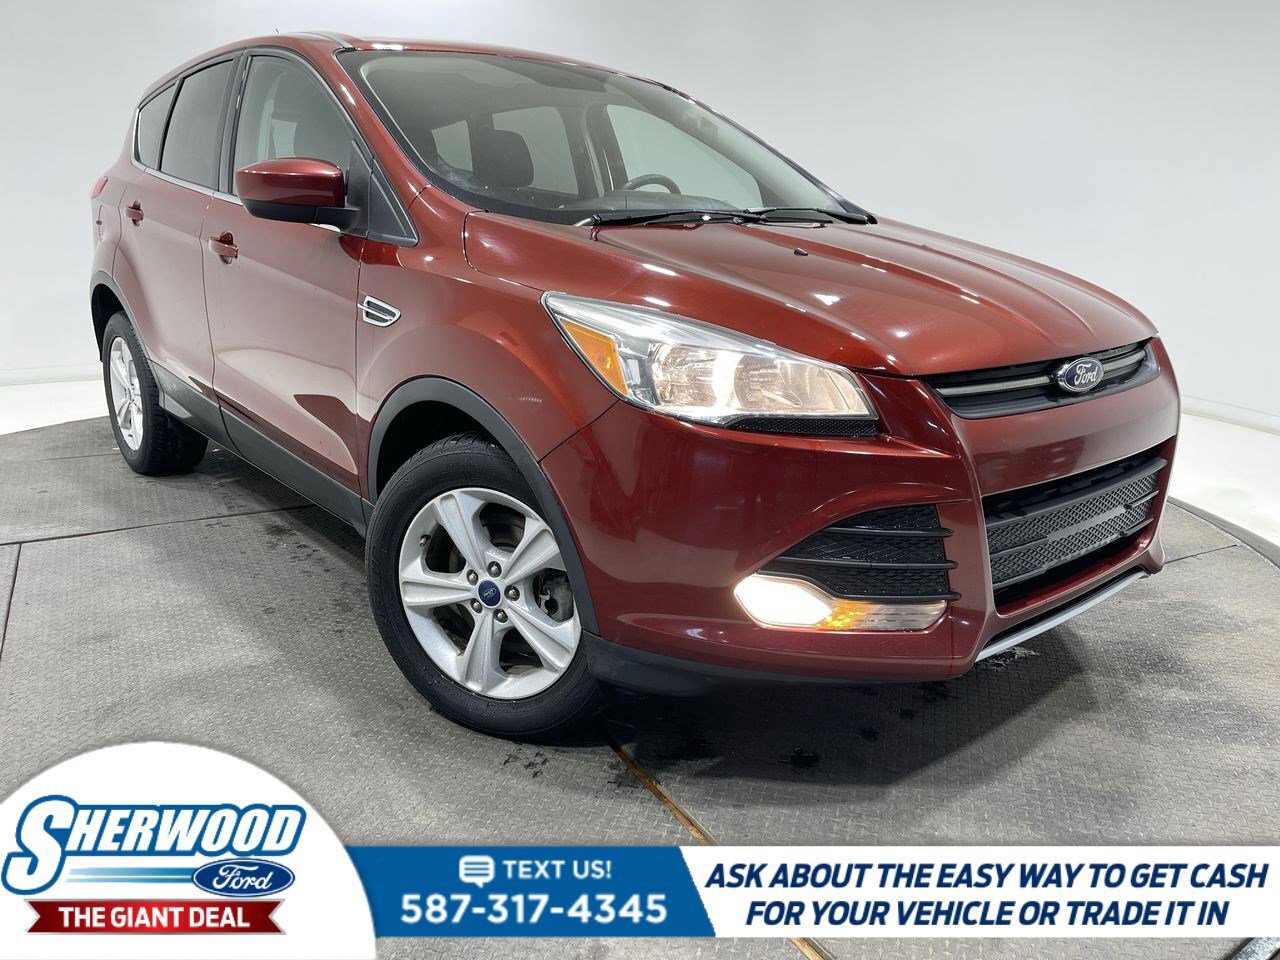 2014 Ford Escape SE AWD-$0 Down $146 Weekly CLEAN CARFAX LOW KM